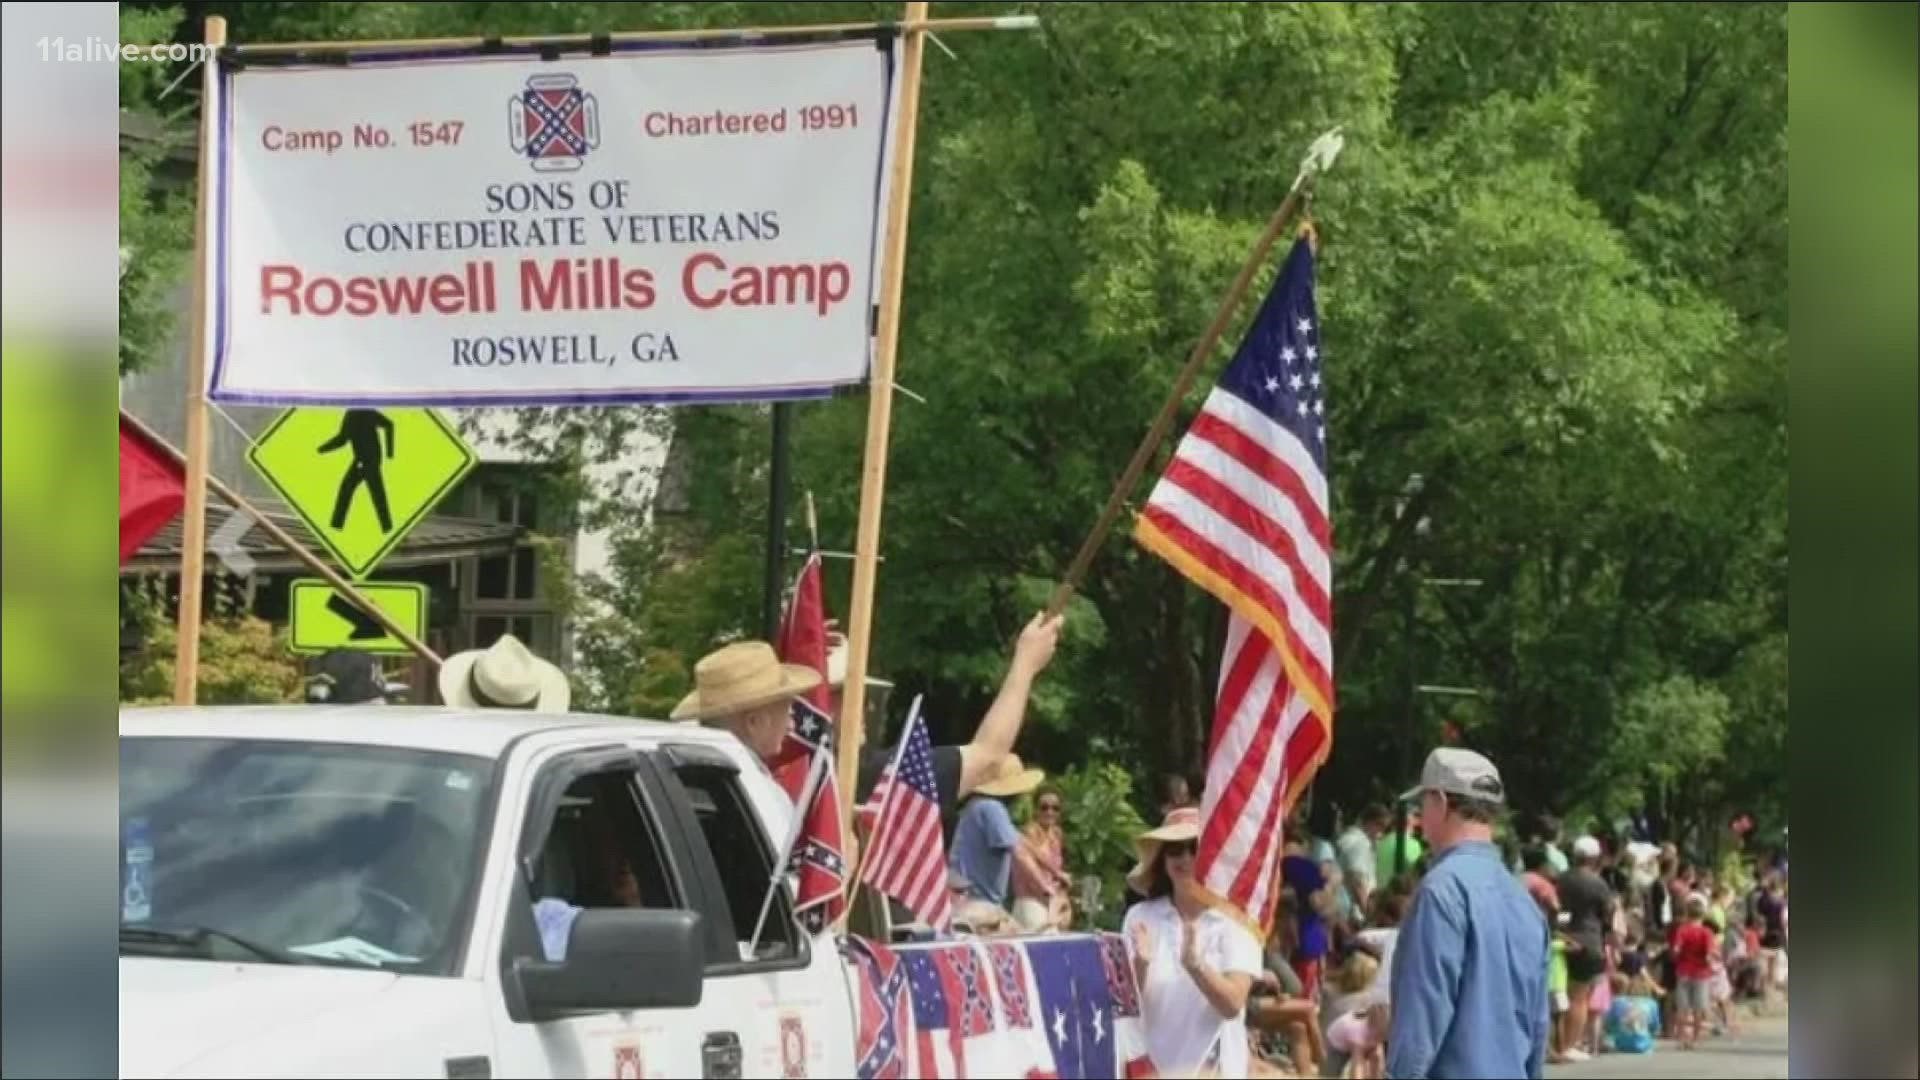 A federal appeals court says a Georgia city did not violate the constitutional rights of a Sons of Confederate Veterans group when it banned the flag.